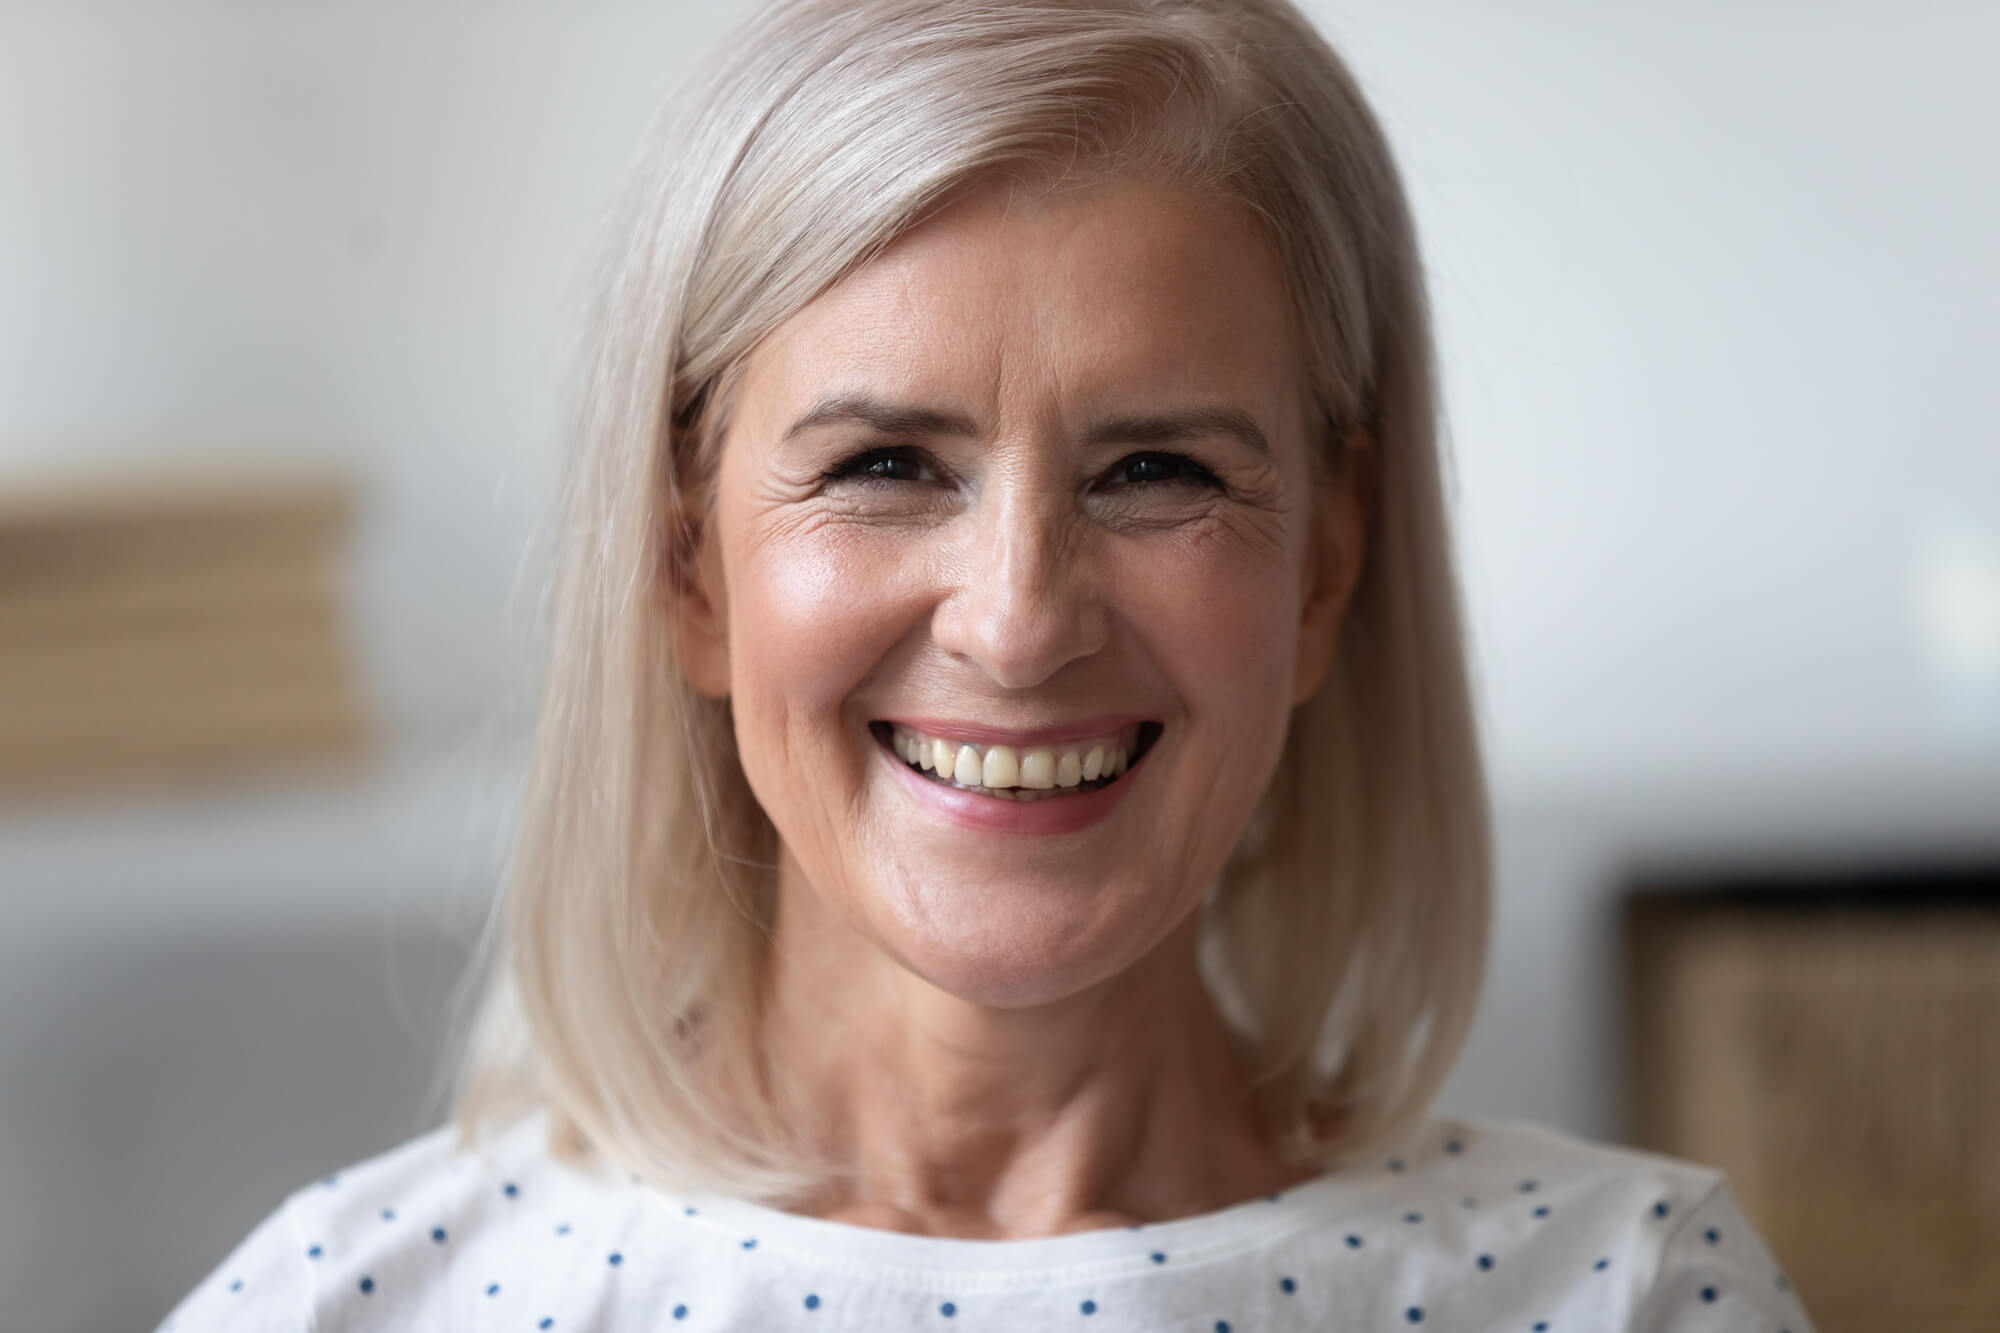 Close up portrait middle-aged blond woman looks at camera posing indoors feels happy